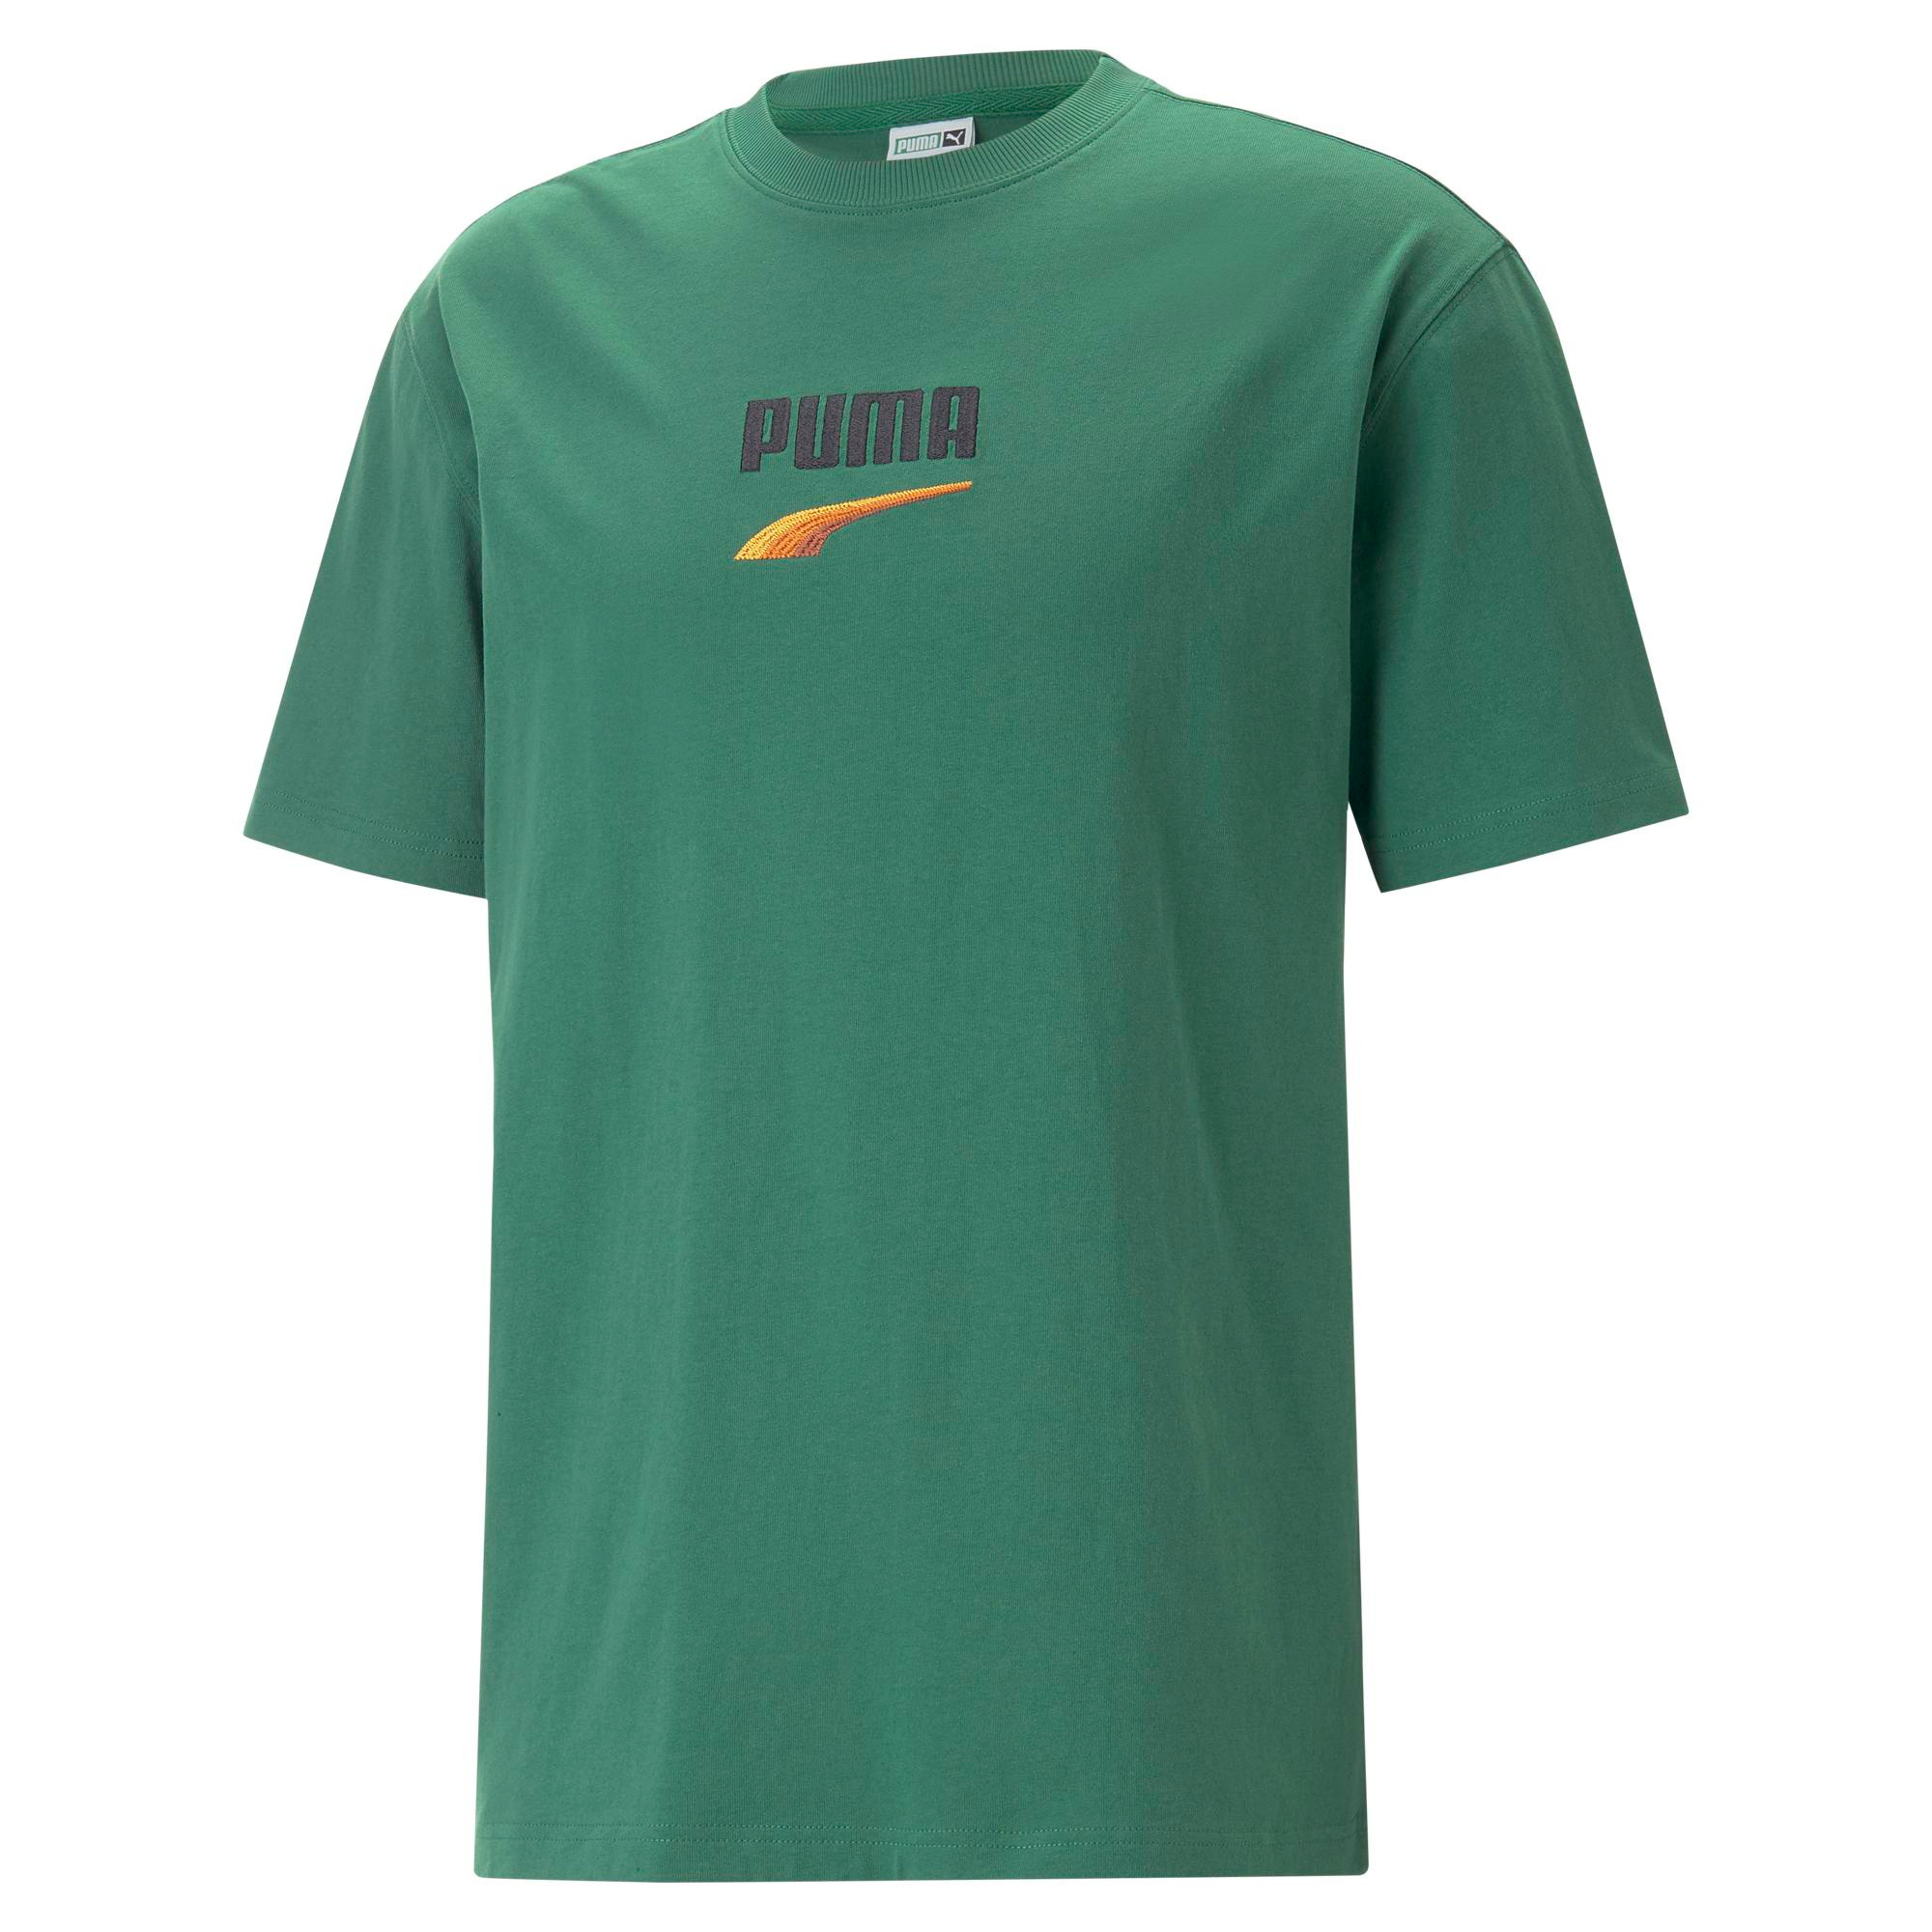 Puma - Cotton T-shirt with logo, Green, large image number 0